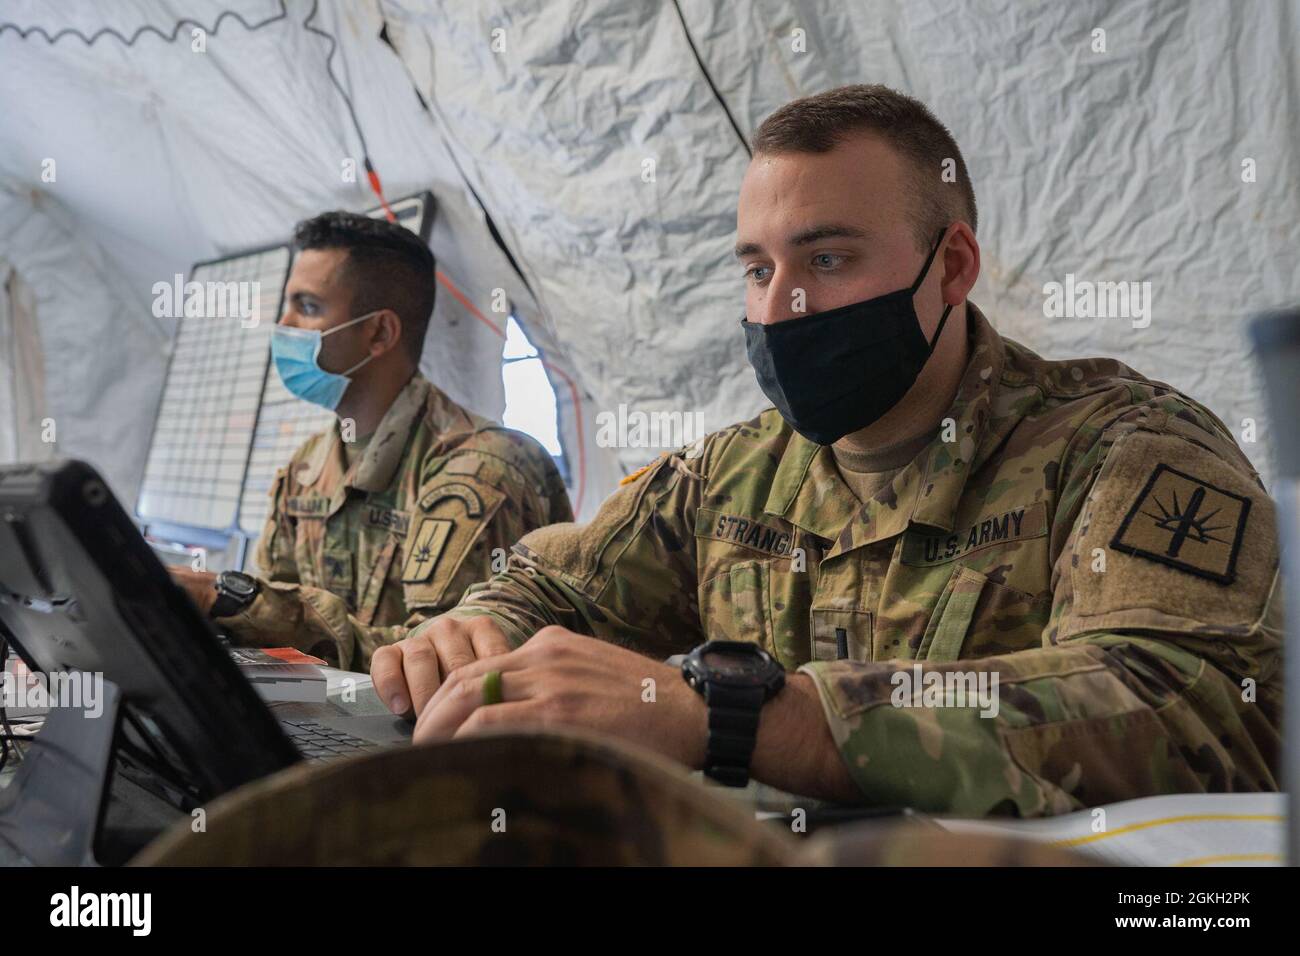 U.S. Army Sgt. Nakalunk, the property book non-commissioned officer, and 1st Lt. Nathan Strange, engineer officer and platoon leader, both assigned to Headquarters Company 204th Engineer Battalion, 153rd Troop Command Brigade, 53rd Troop Command, work on their laptops at Regional Support Camp Panther, North Vernon, Ind., April 20, 2021. Nakalunk and Strange work in the Army Logistics Operations Center. NY National Guard Soldiers provide operational and logistical support to other state National Guard battalions during the Guardian Response Exercise 21 Indiana. Stock Photo